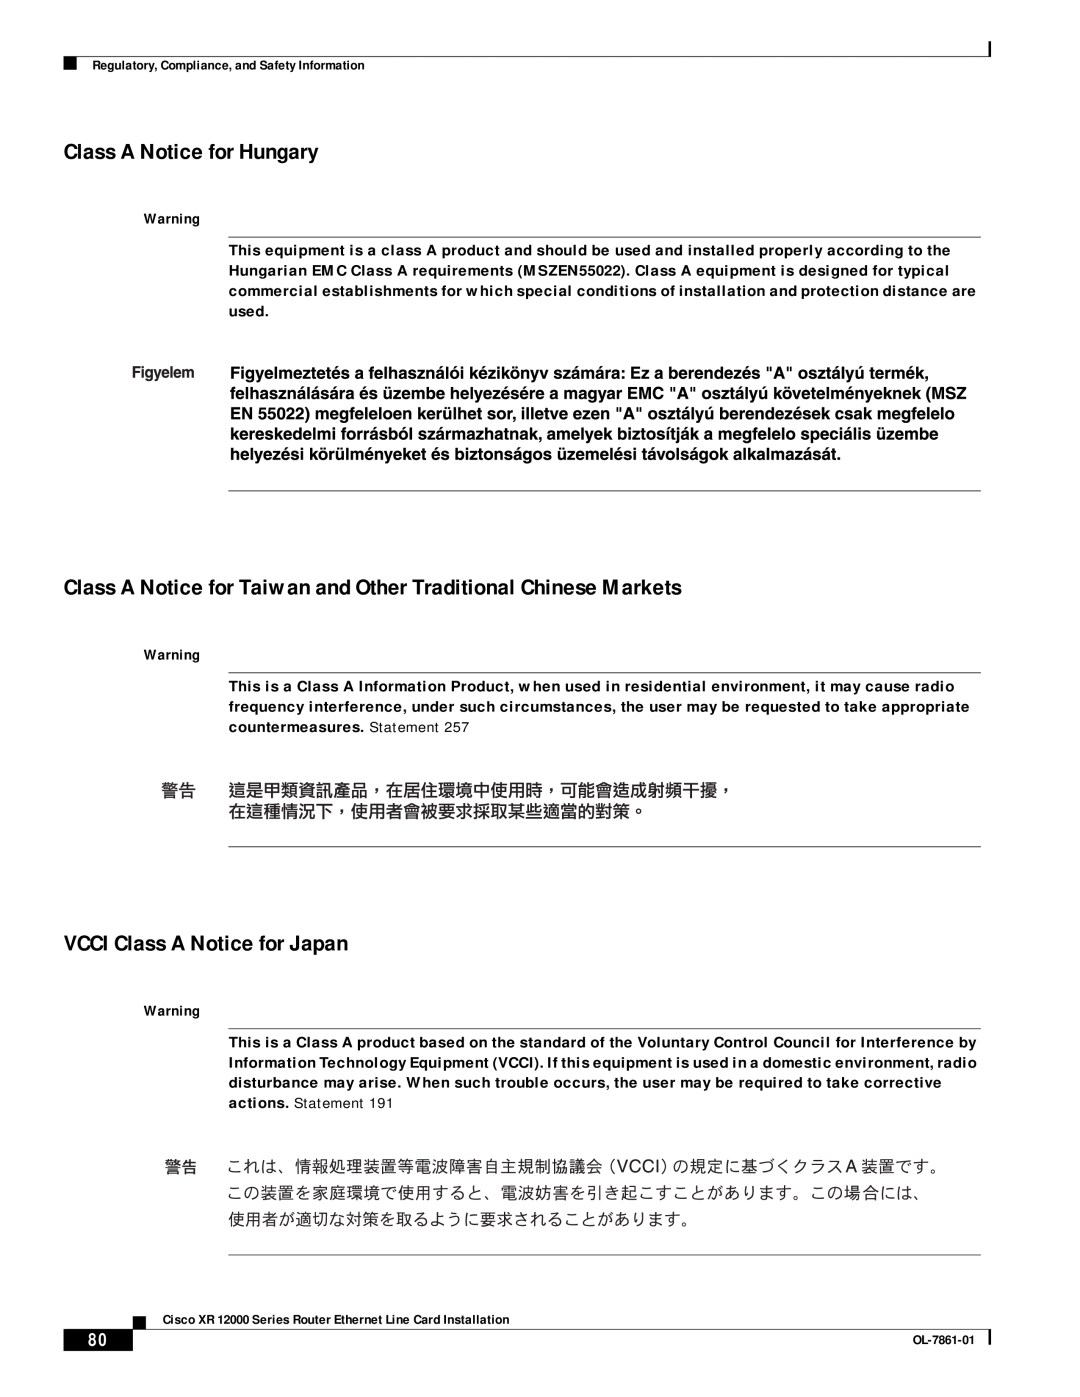 Cisco Systems OL-7861-01 manual Class A Notice for Hungary, Class A Notice for Taiwan and Other Traditional Chinese Markets 